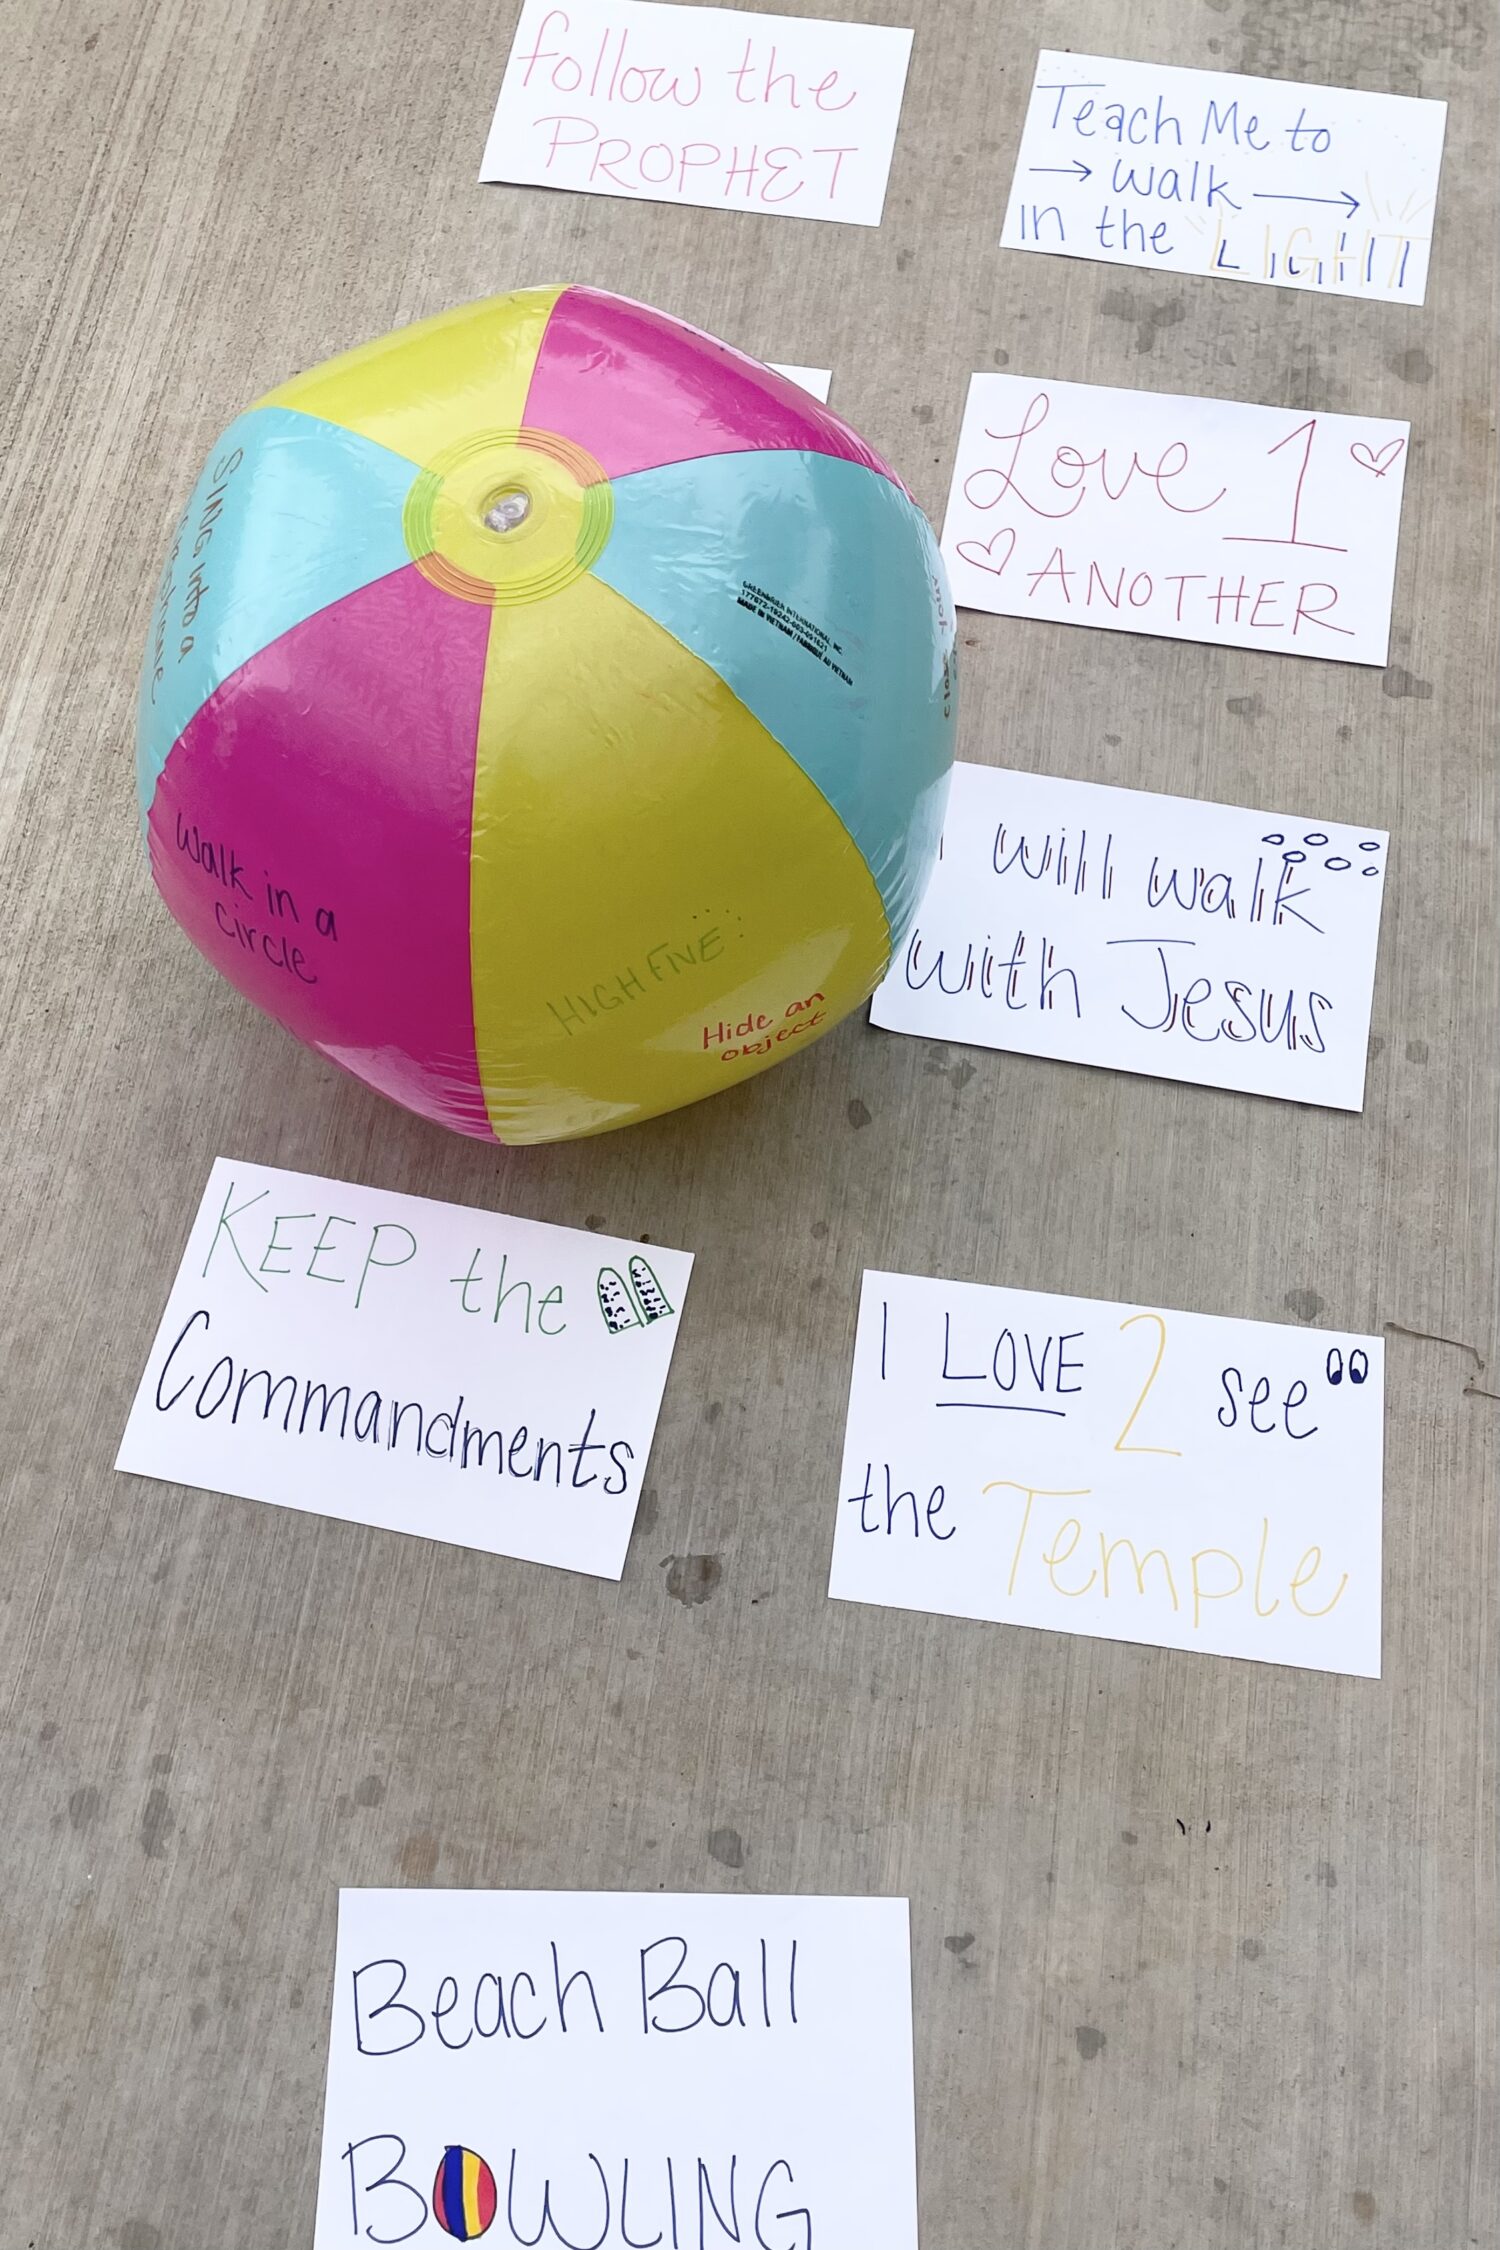 Beach Ball Singing Time Ideas for LDS Primary Music Leaders